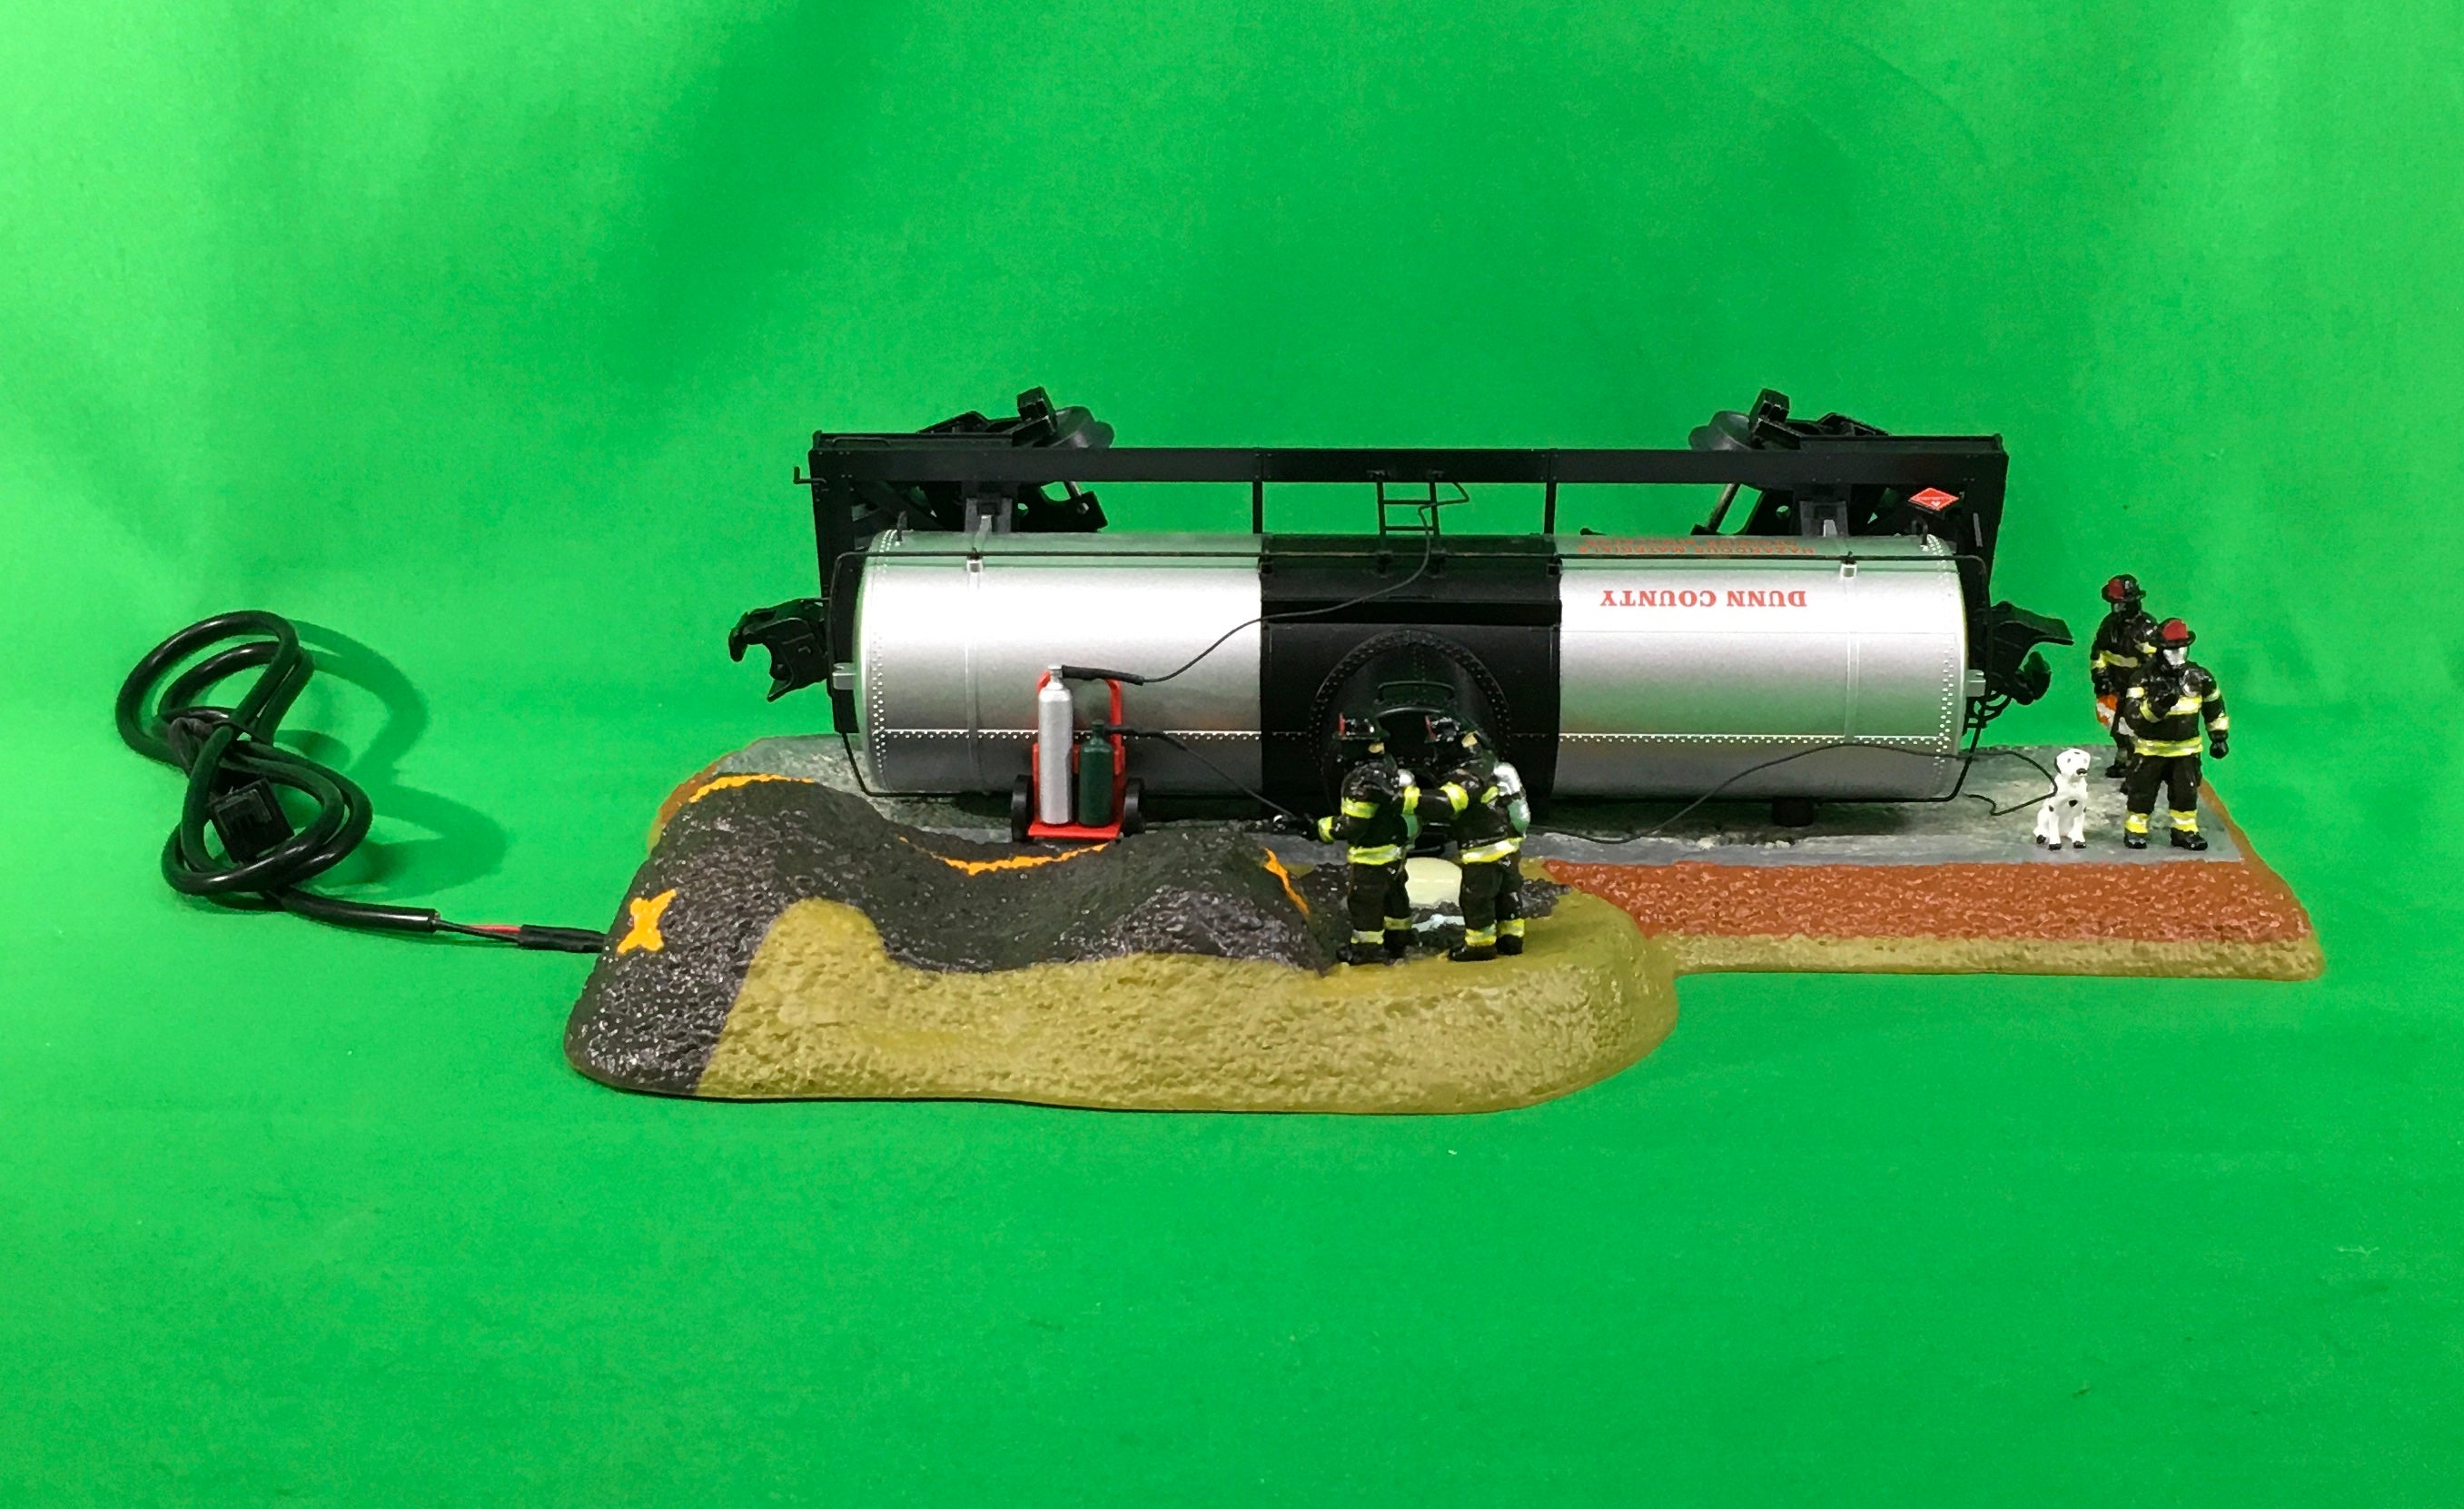 Lionel 2229260 - Firefighter Tank Car Accident Training